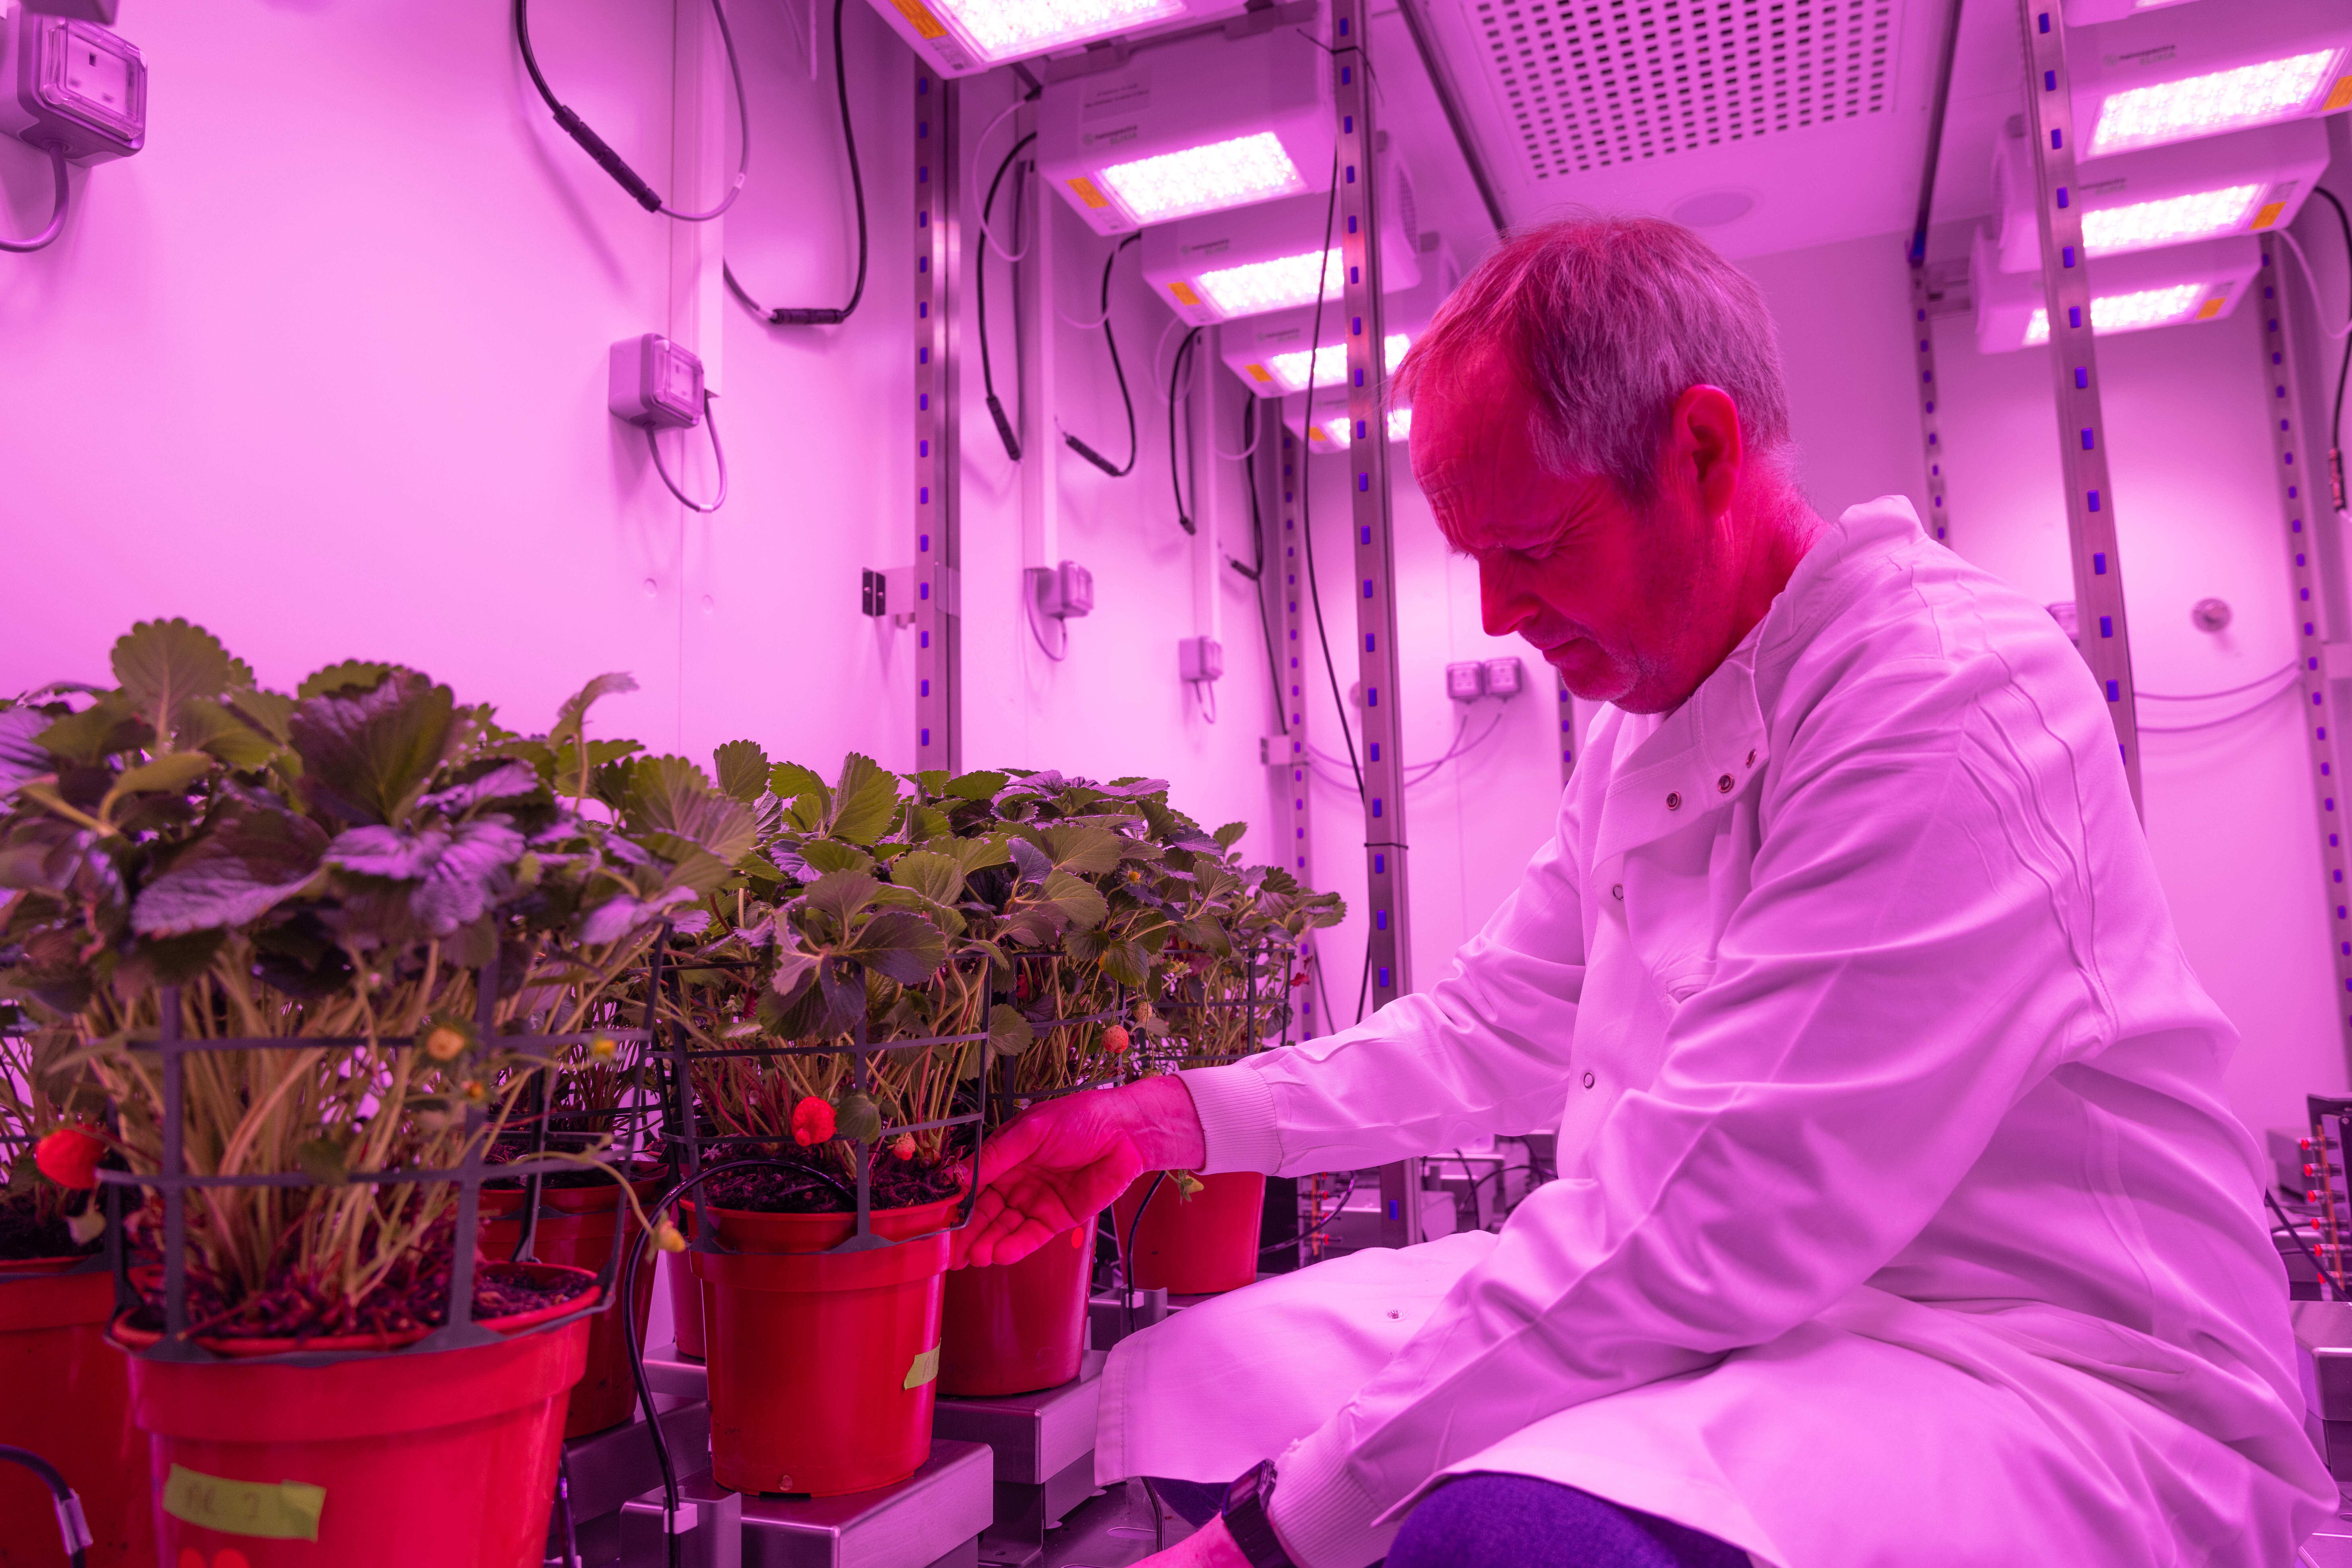 Dr Phillip Davey works in the drought room at Essex University’s new plant lab (Essex University/PA)